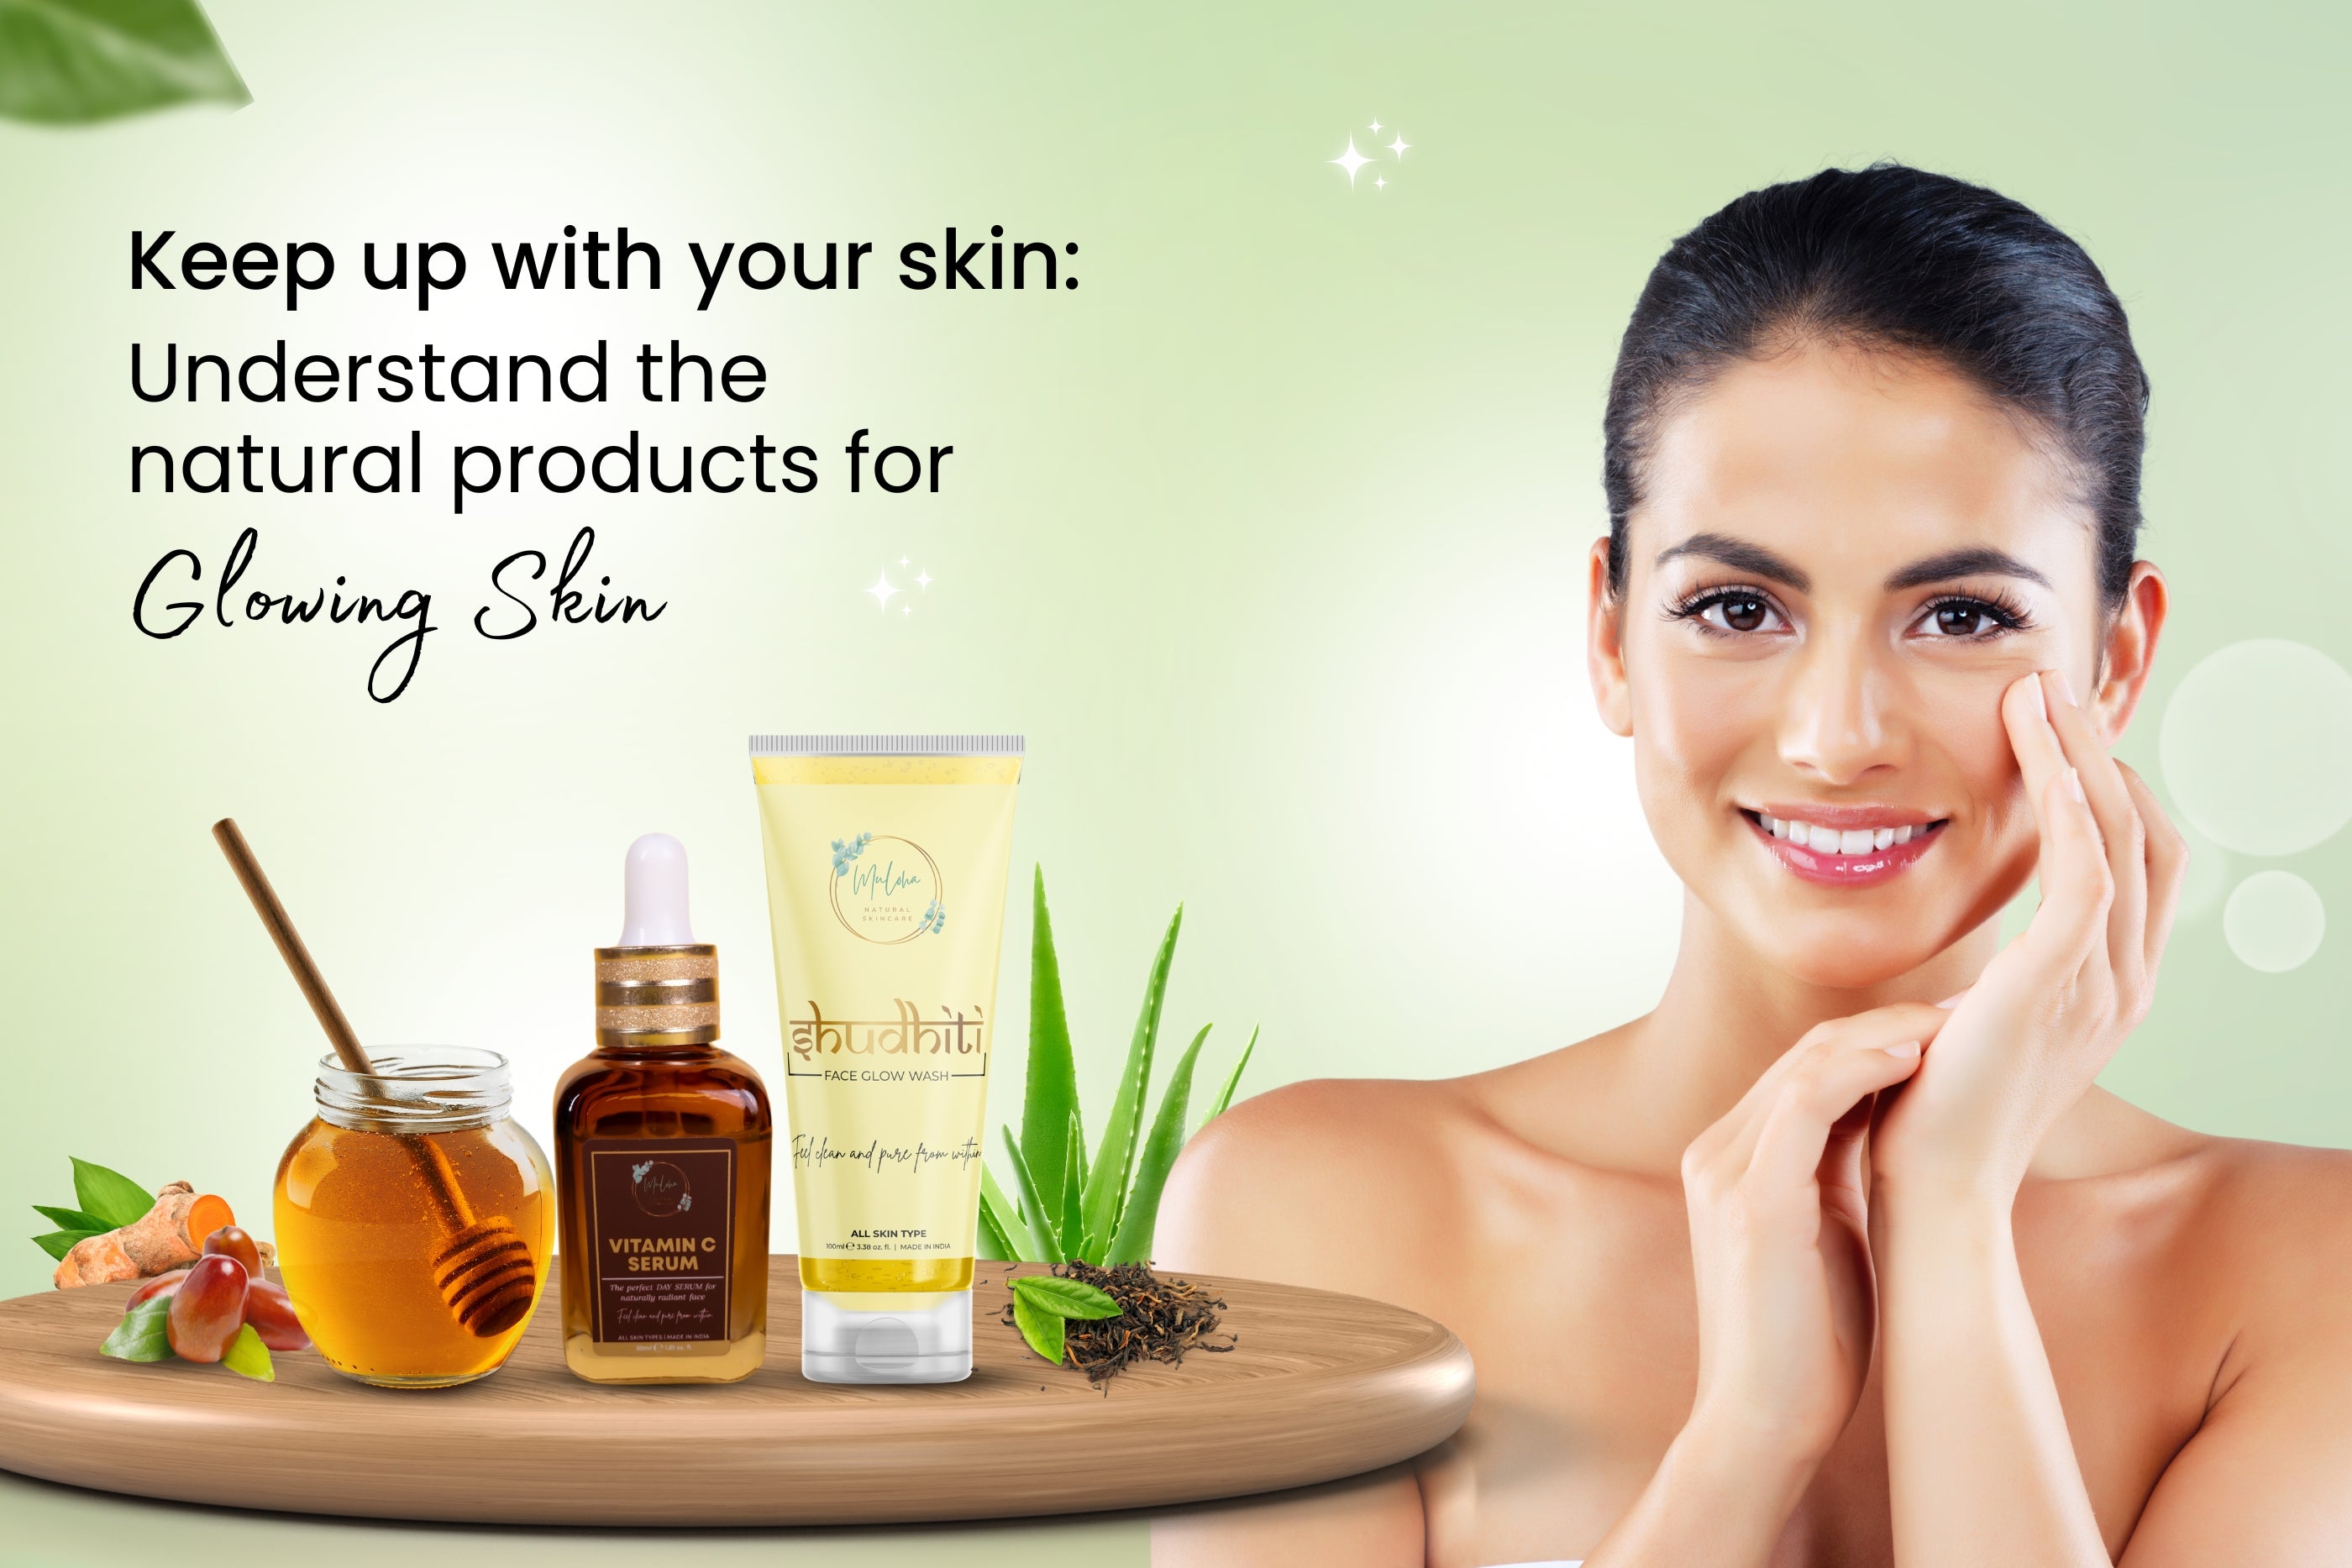 Keep up with your Skin: Understand The Natural Products for Glowing Skin